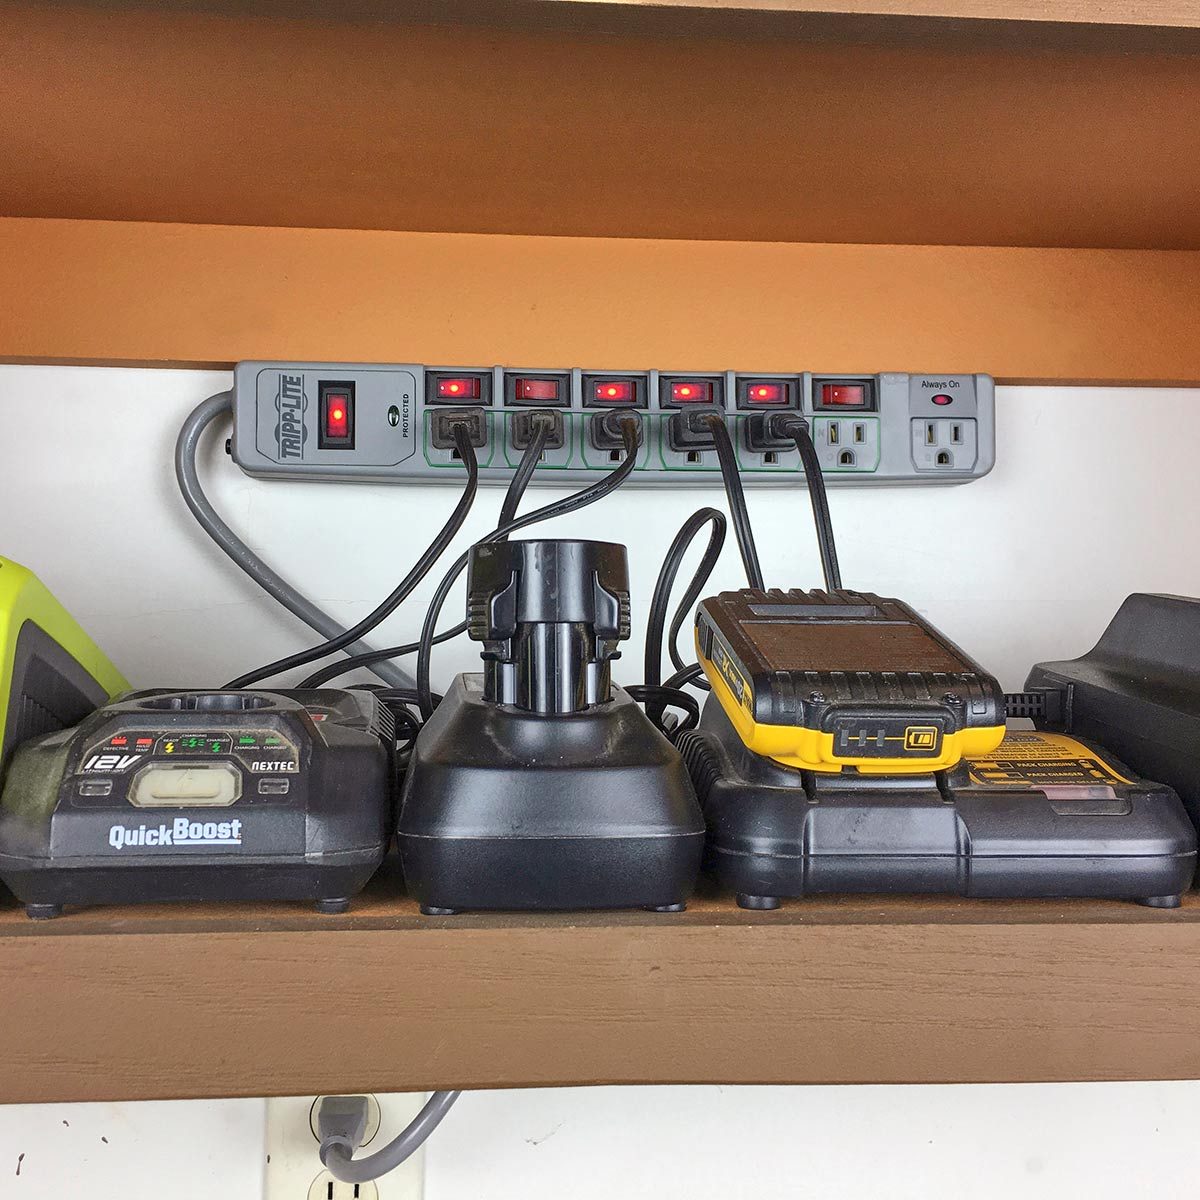 This Power Strip is a Must-Have for Your Workshop